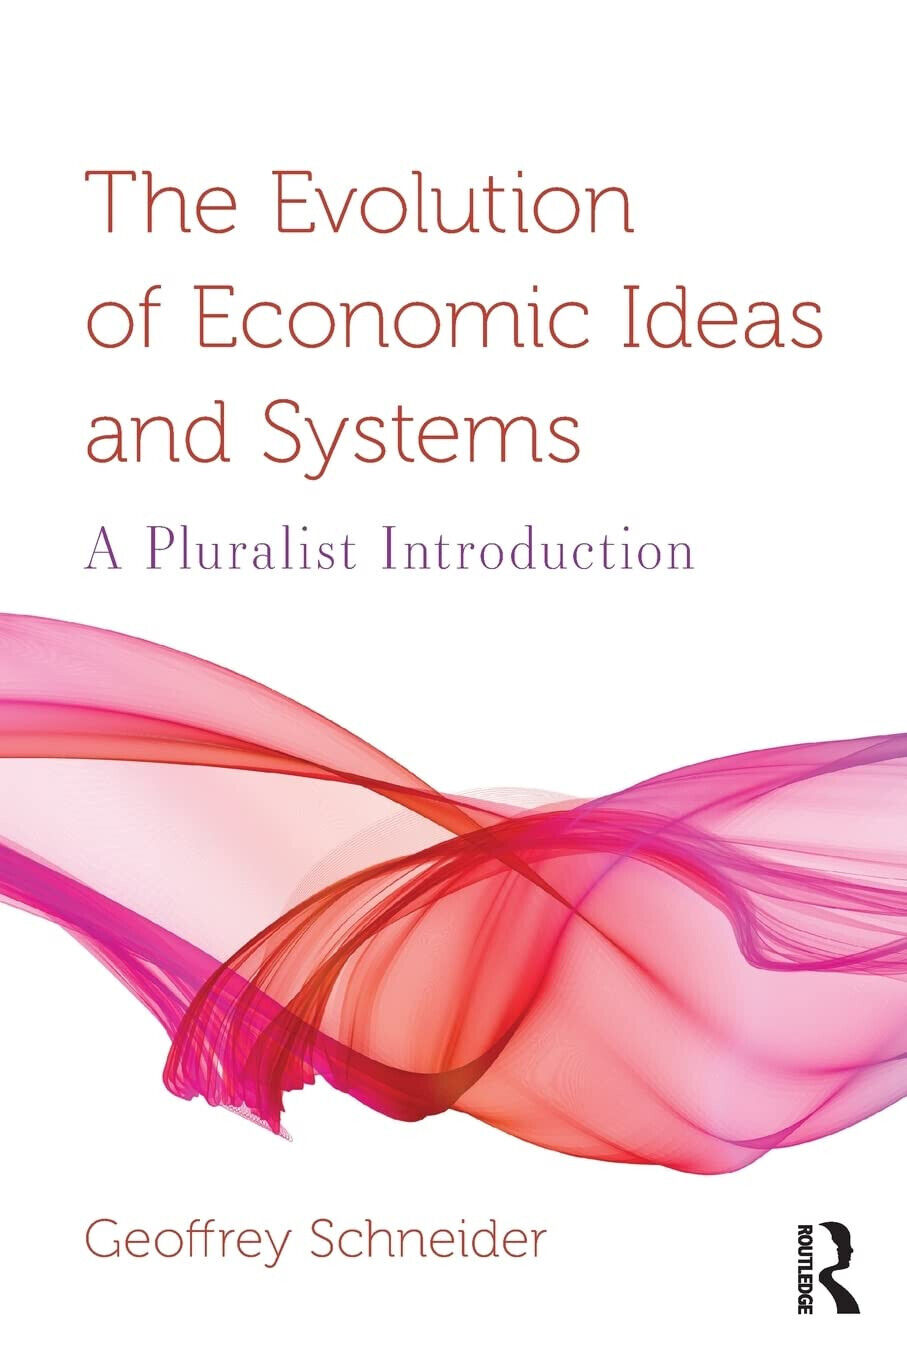 The Evolution of Economic Ideas and Systems - Geoffrey - Taylor & Francis, 2018 libro usato